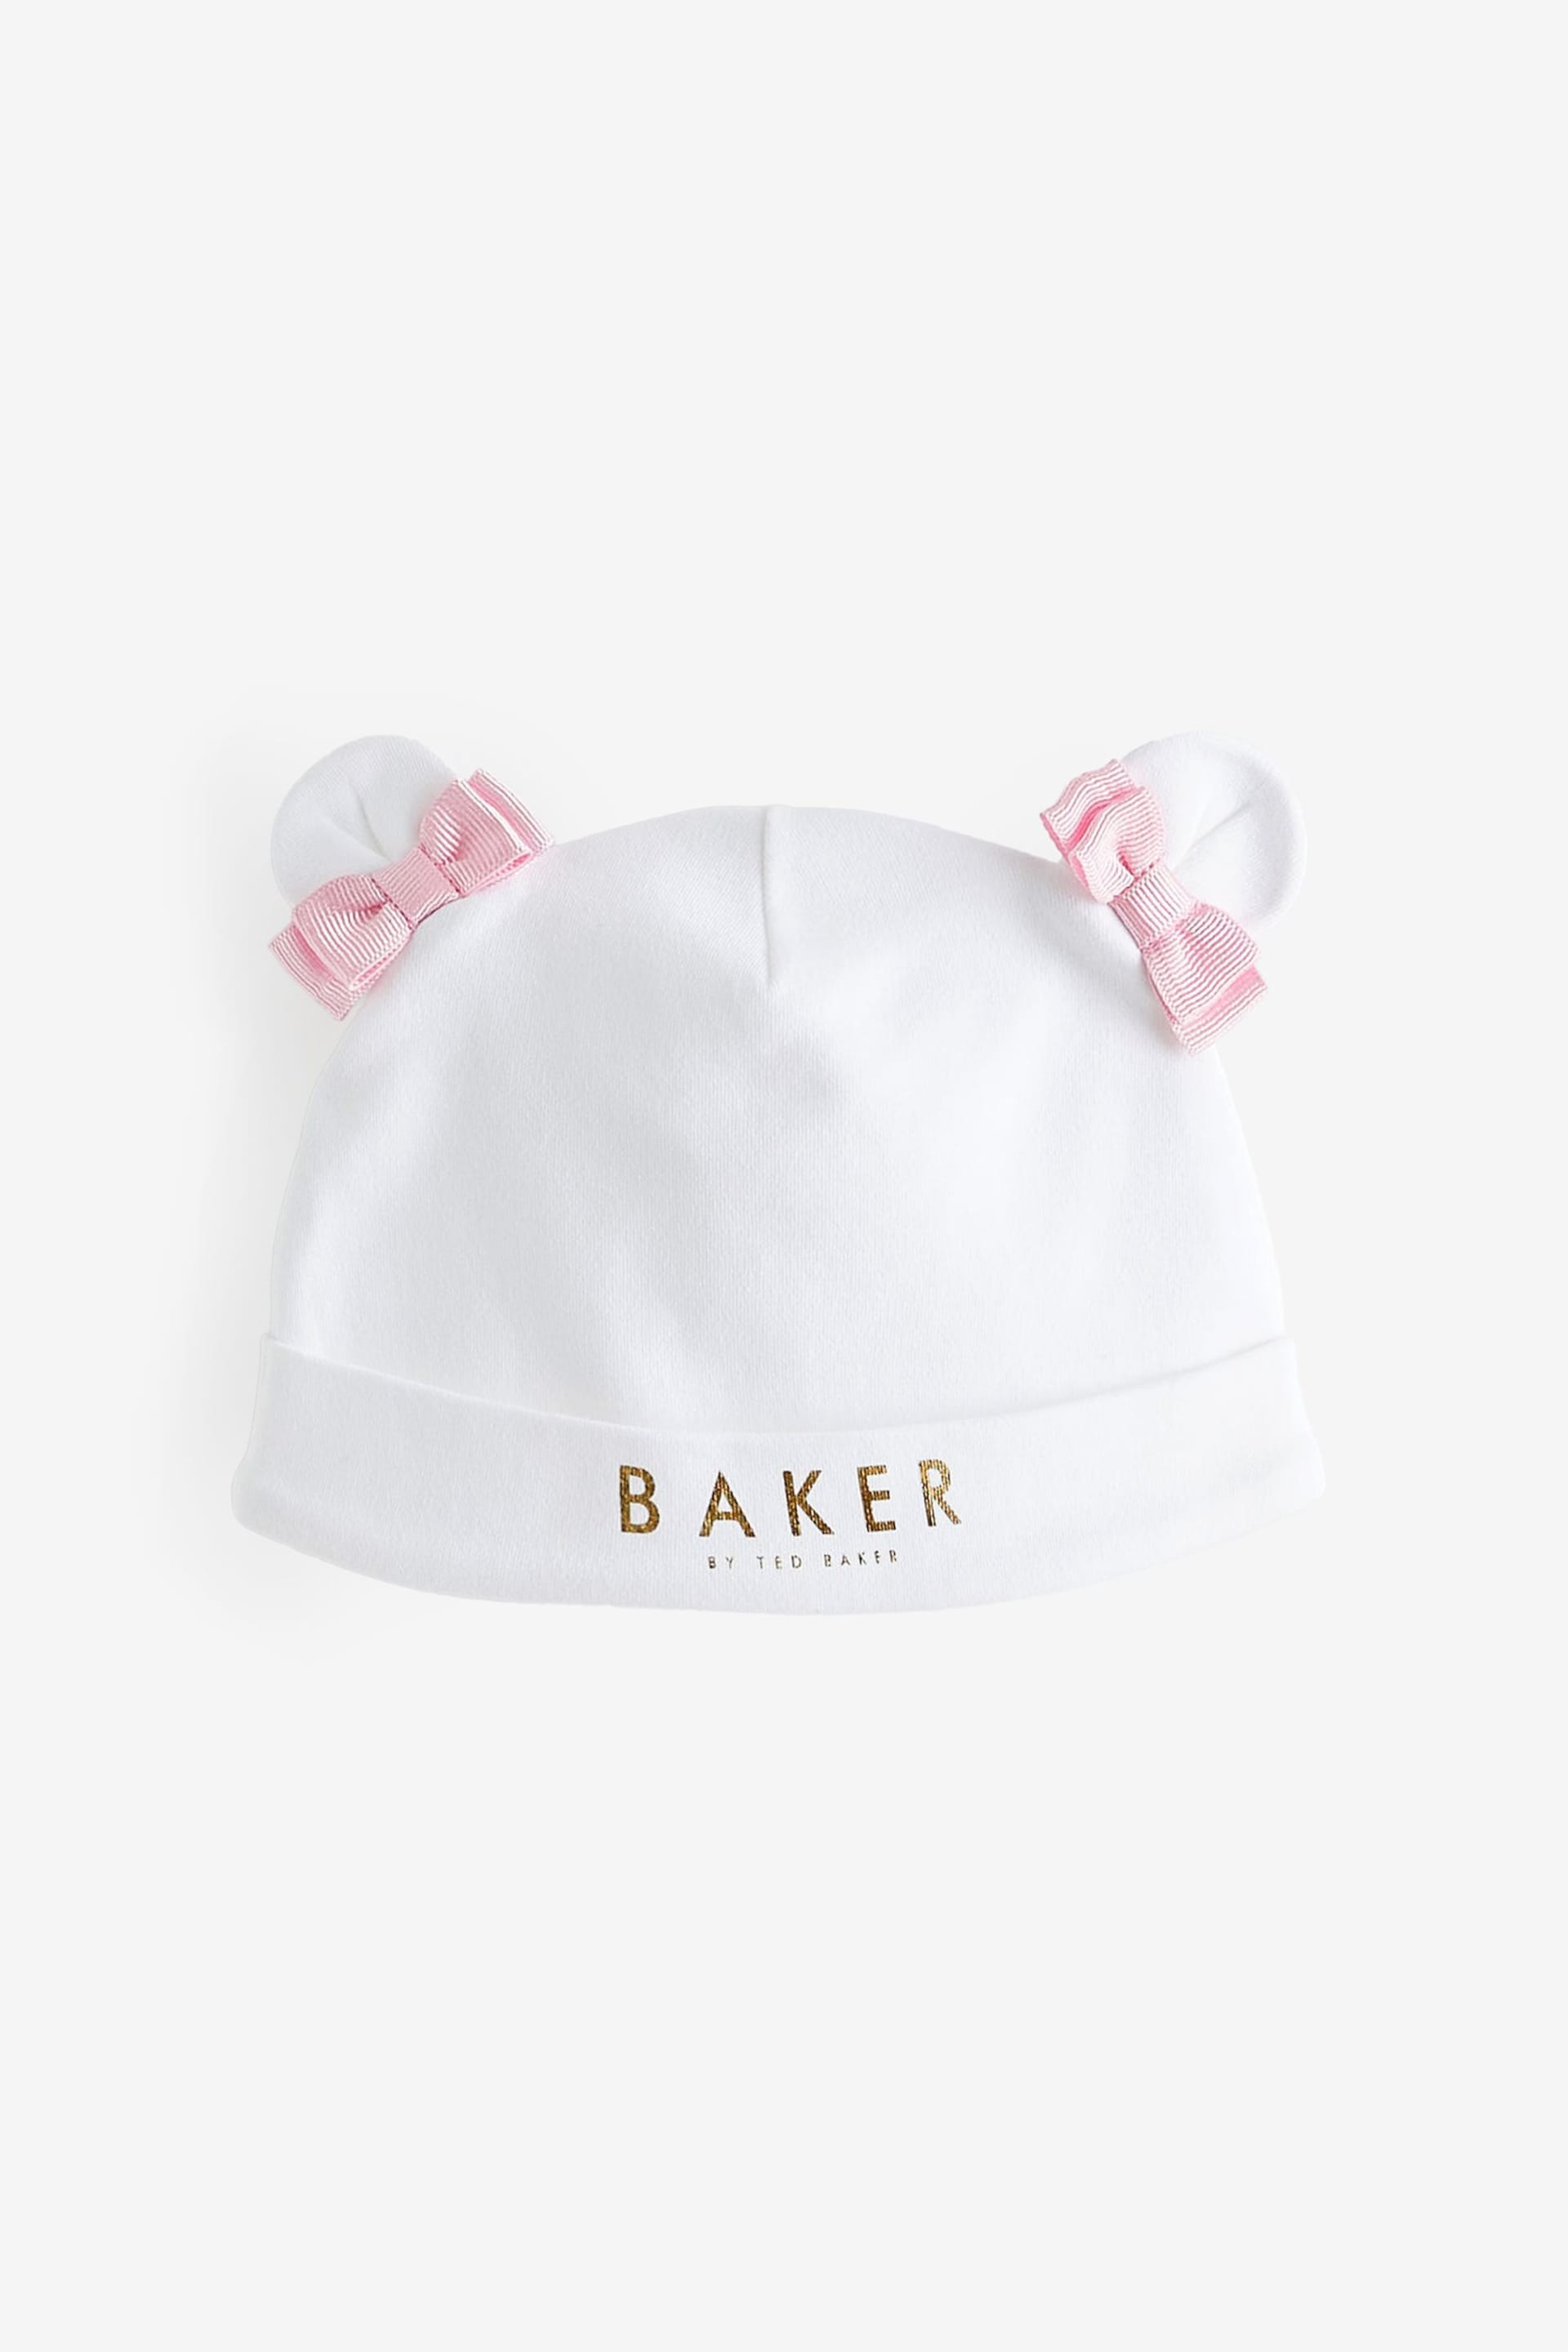 Baker by Ted Baker Mirror Floral White Sleepsuit And Hat Set - Image 3 of 6